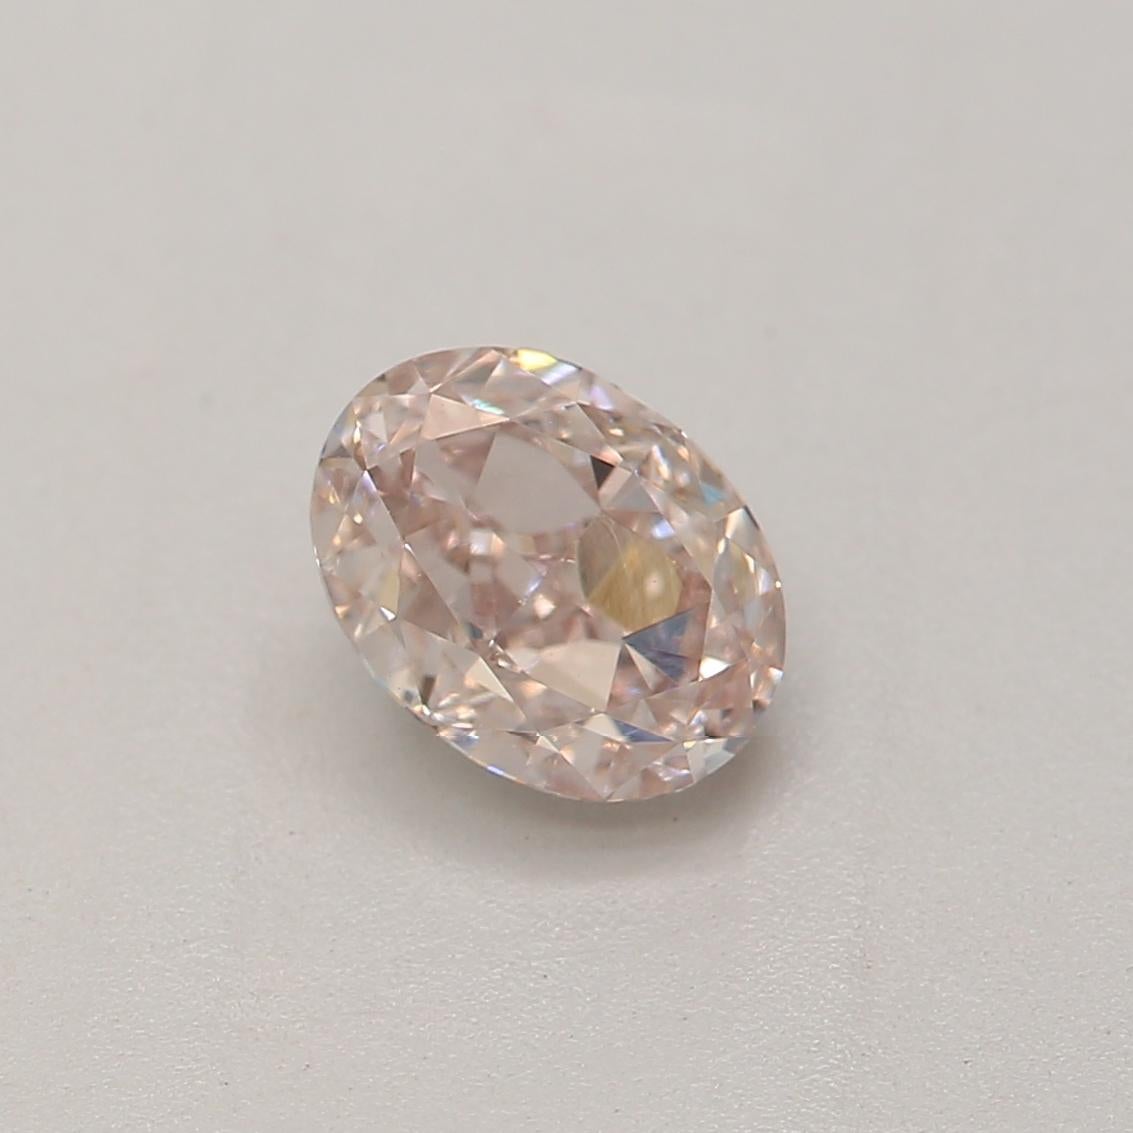 **100% NATURAL FANCY COLOUR DIAMOND**

✪ Diamond Details ✪

➛ Shape: Oval
➛ Colour Grade: Light Pinkish Brown
➛ Carat: 0.50
➛ Clarity: VS2
➛ GIA Certified

^FEATURES OF THE DIAMOND^

A 0.50 carat diamond weighs half a carat, equivalent to 100